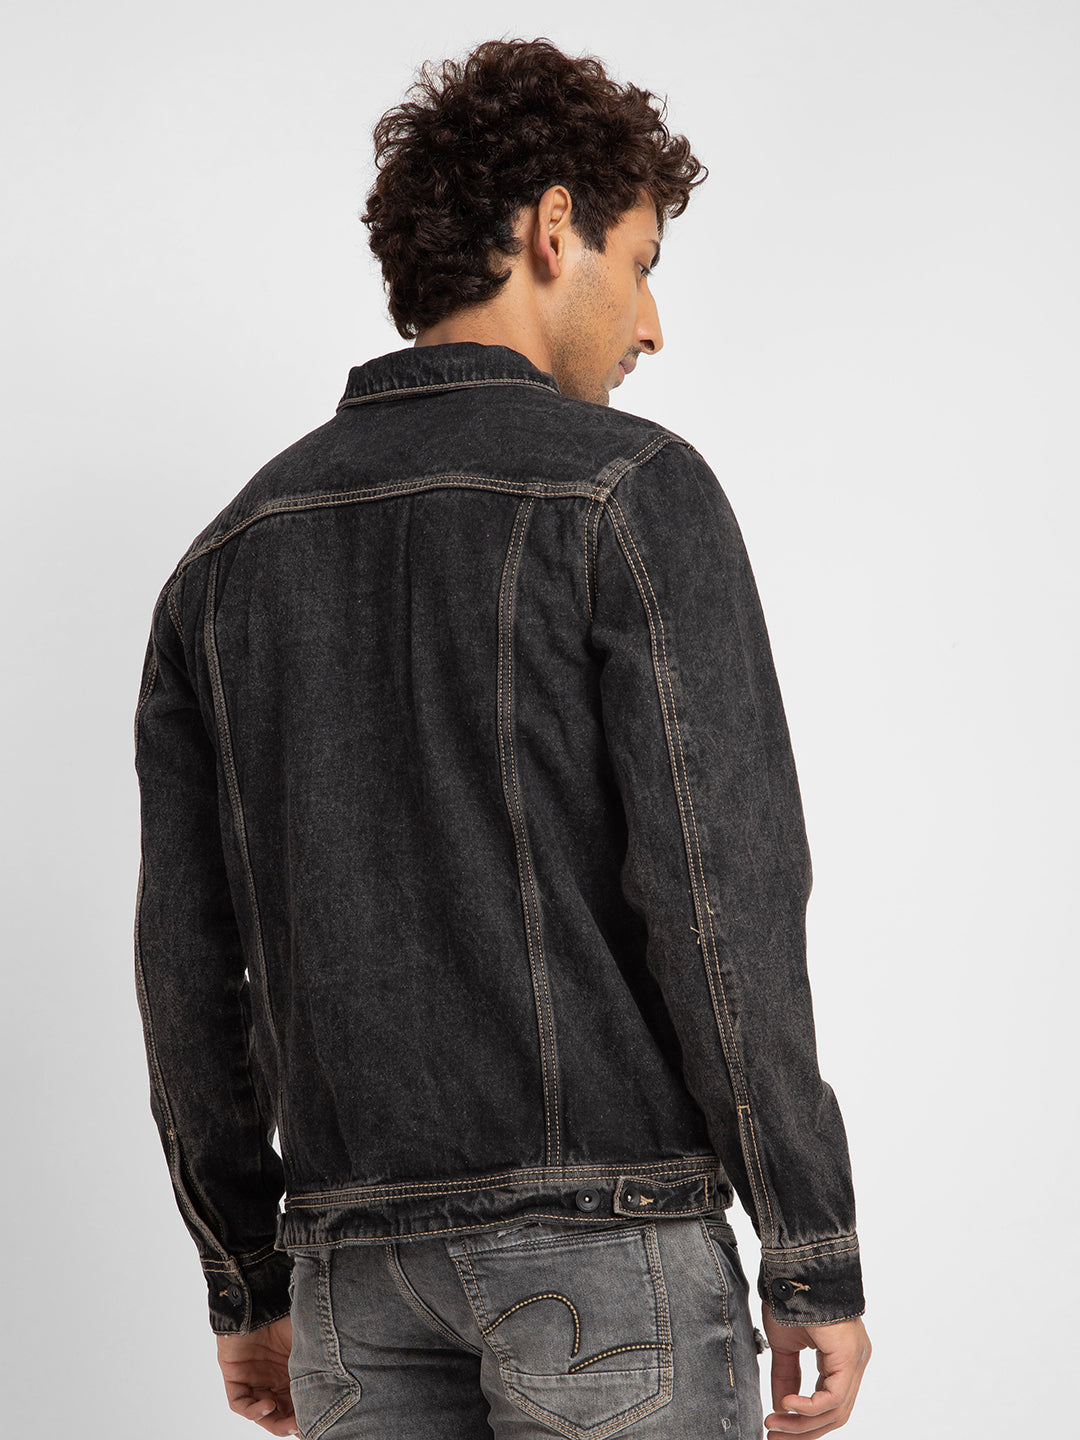 Buy Painted Denim Jackets Online in India - Best Offers